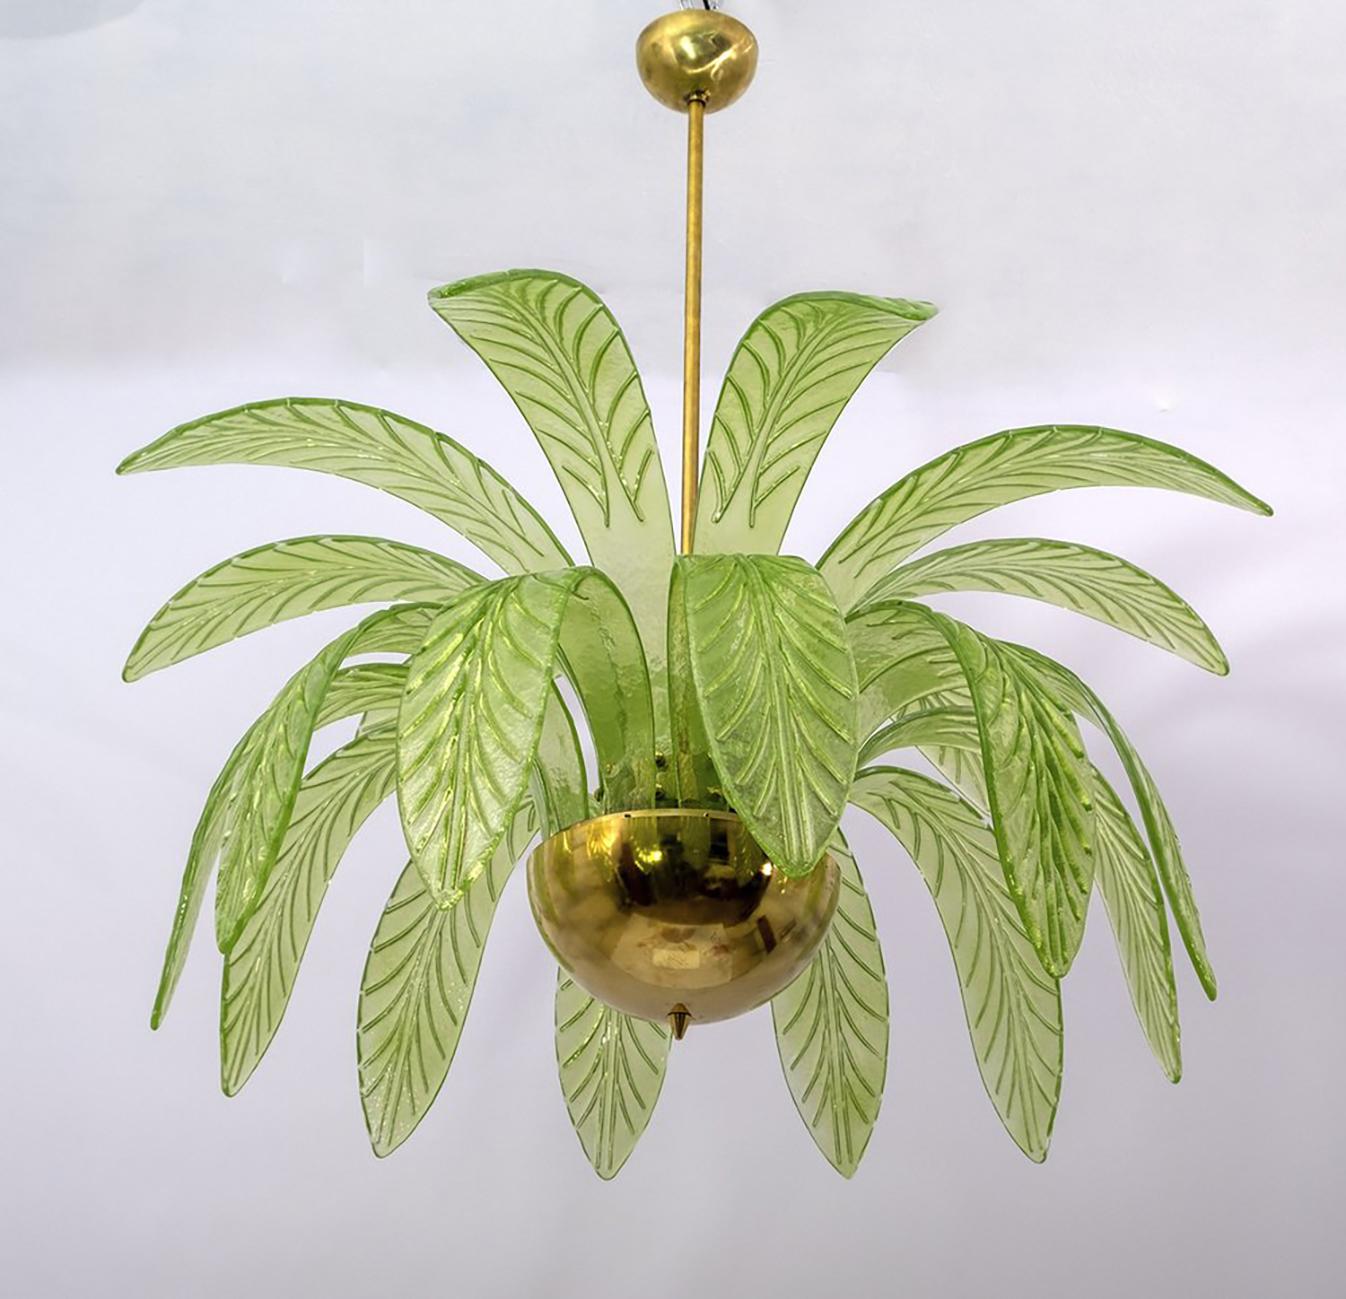 Mouth blown Murano glass chandelier, 20 green Murano glass leaves, brass structure, three bulbs.
The chandelier reproduces the crown of a palm tree.
We supply reducers for USA E12 bulbs.